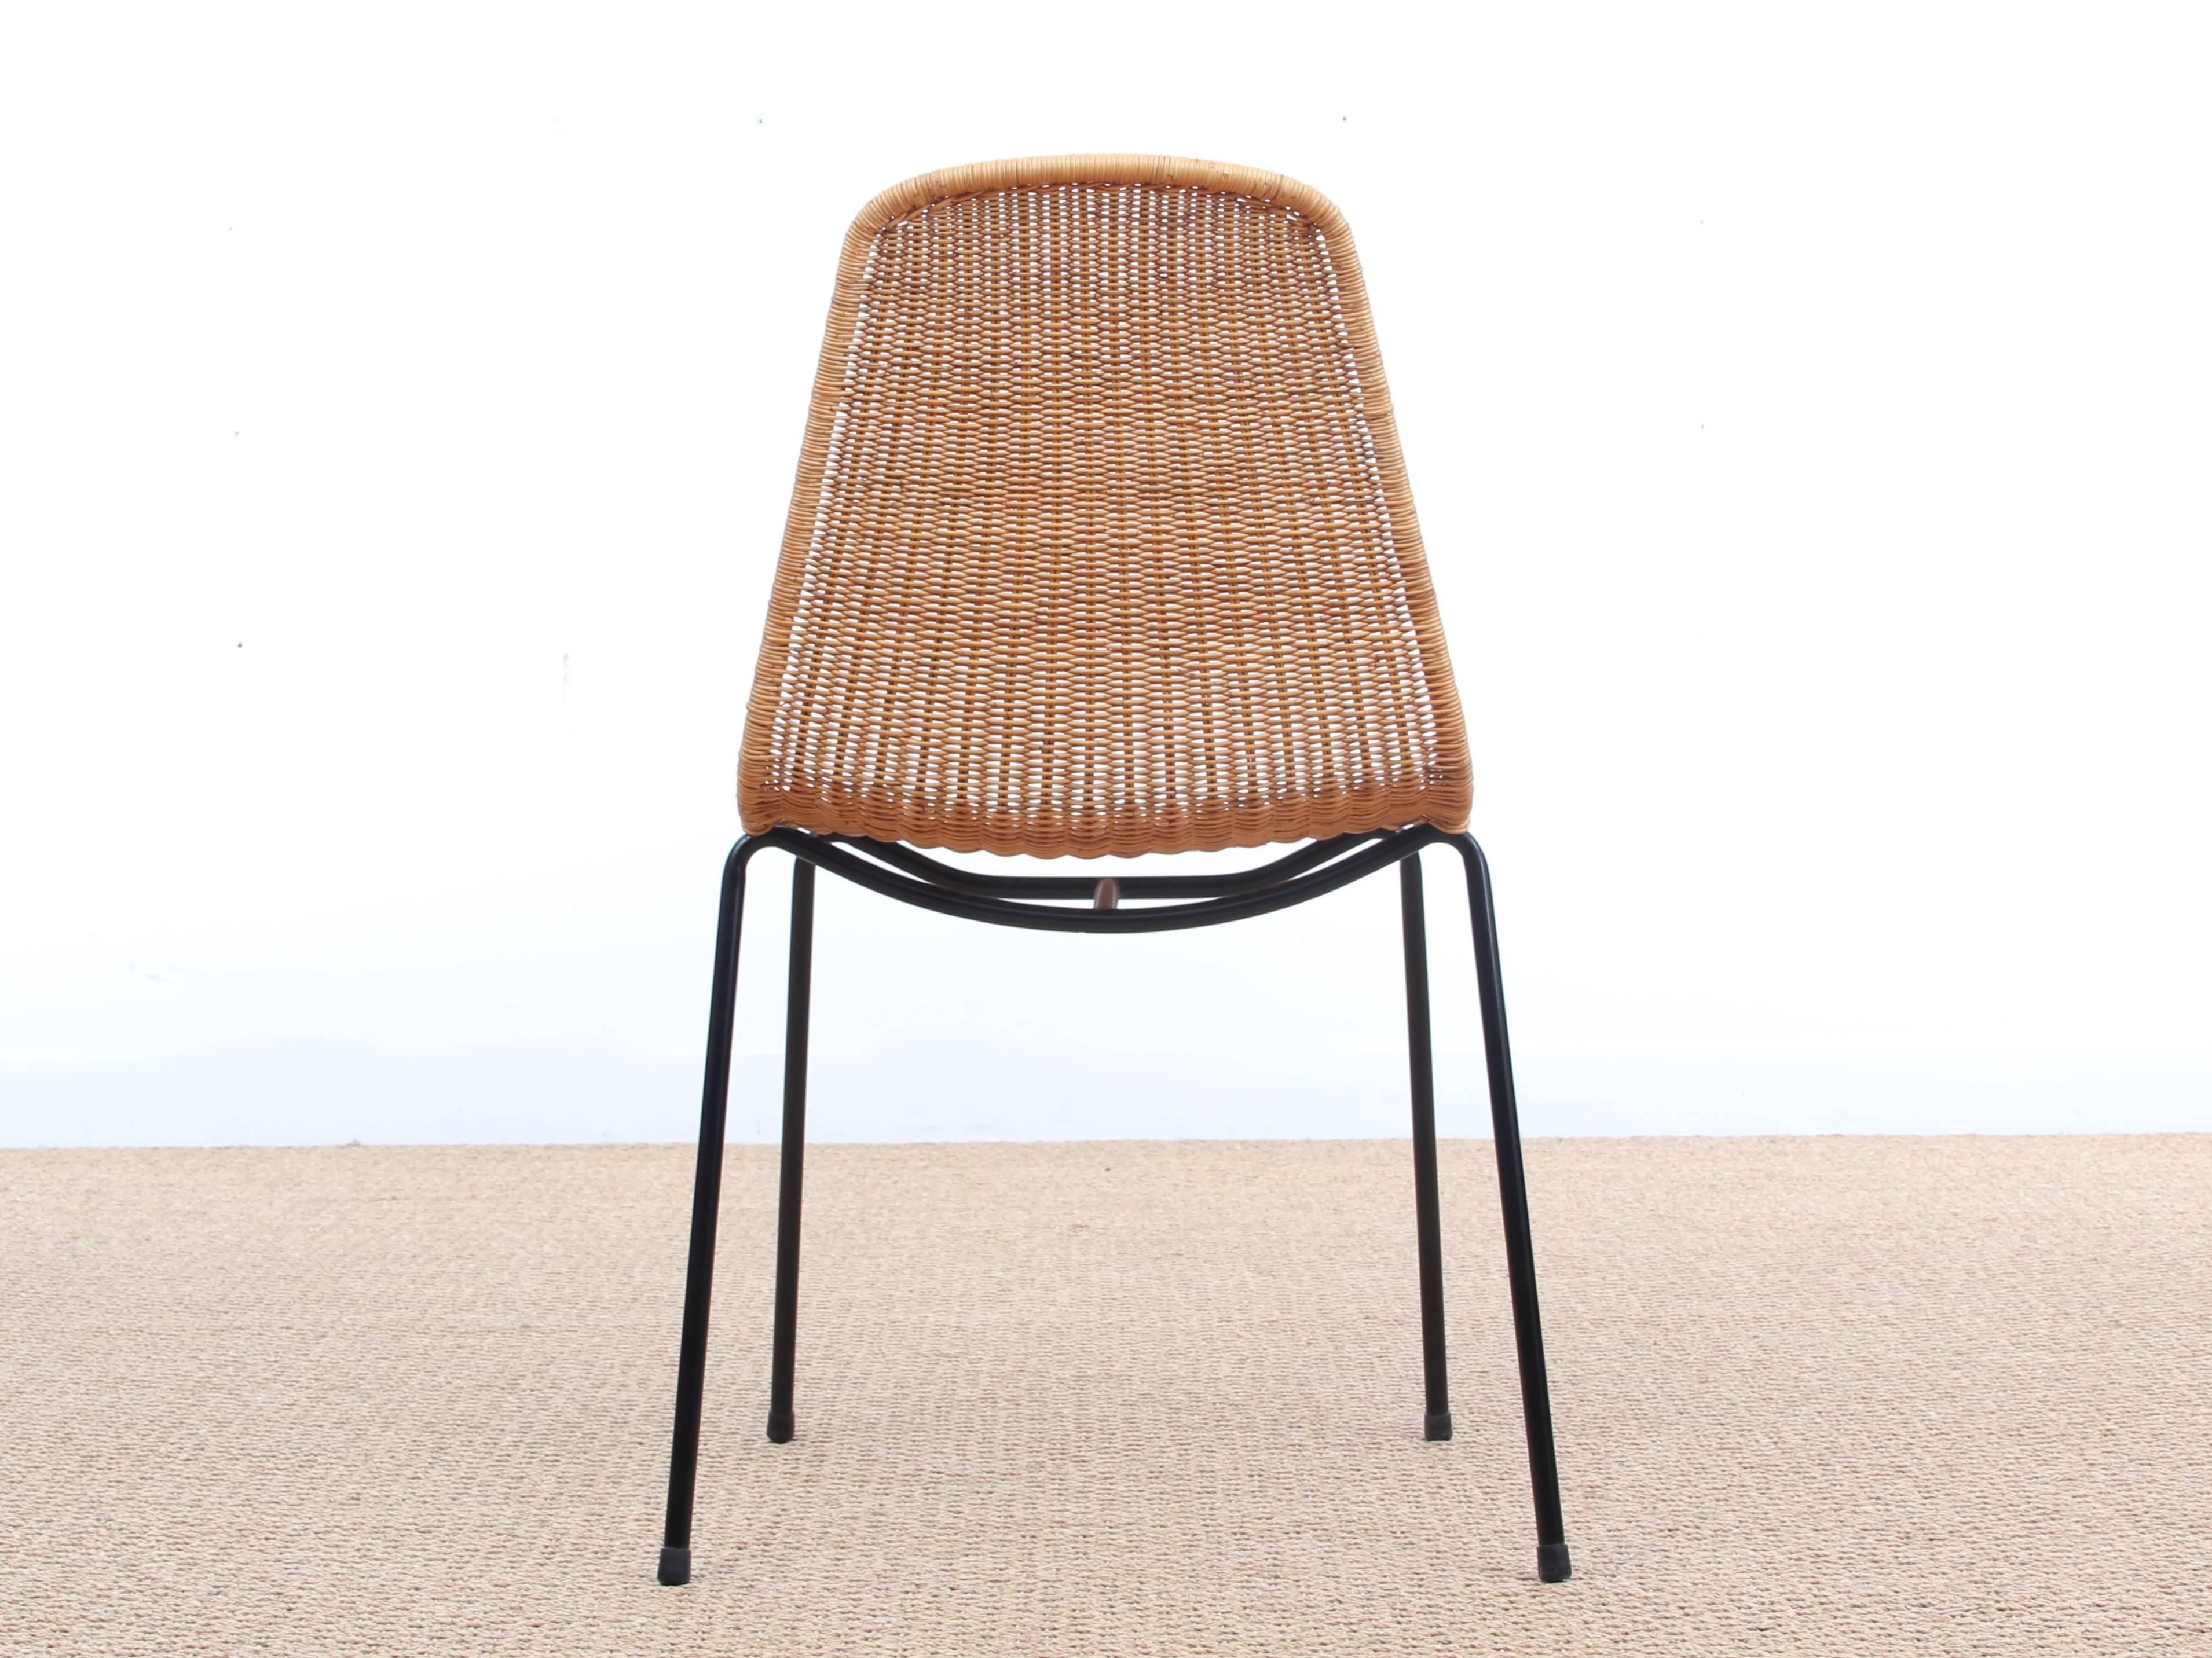 The basket chair by Swiss designer Gian Franco Legler was designed in 1951 for the basket restaurant in Italy. This comfortable stacking chair received the 'Good Design award' in 1953 from the Museum of Modern Art (MoMA) in New York. The basket